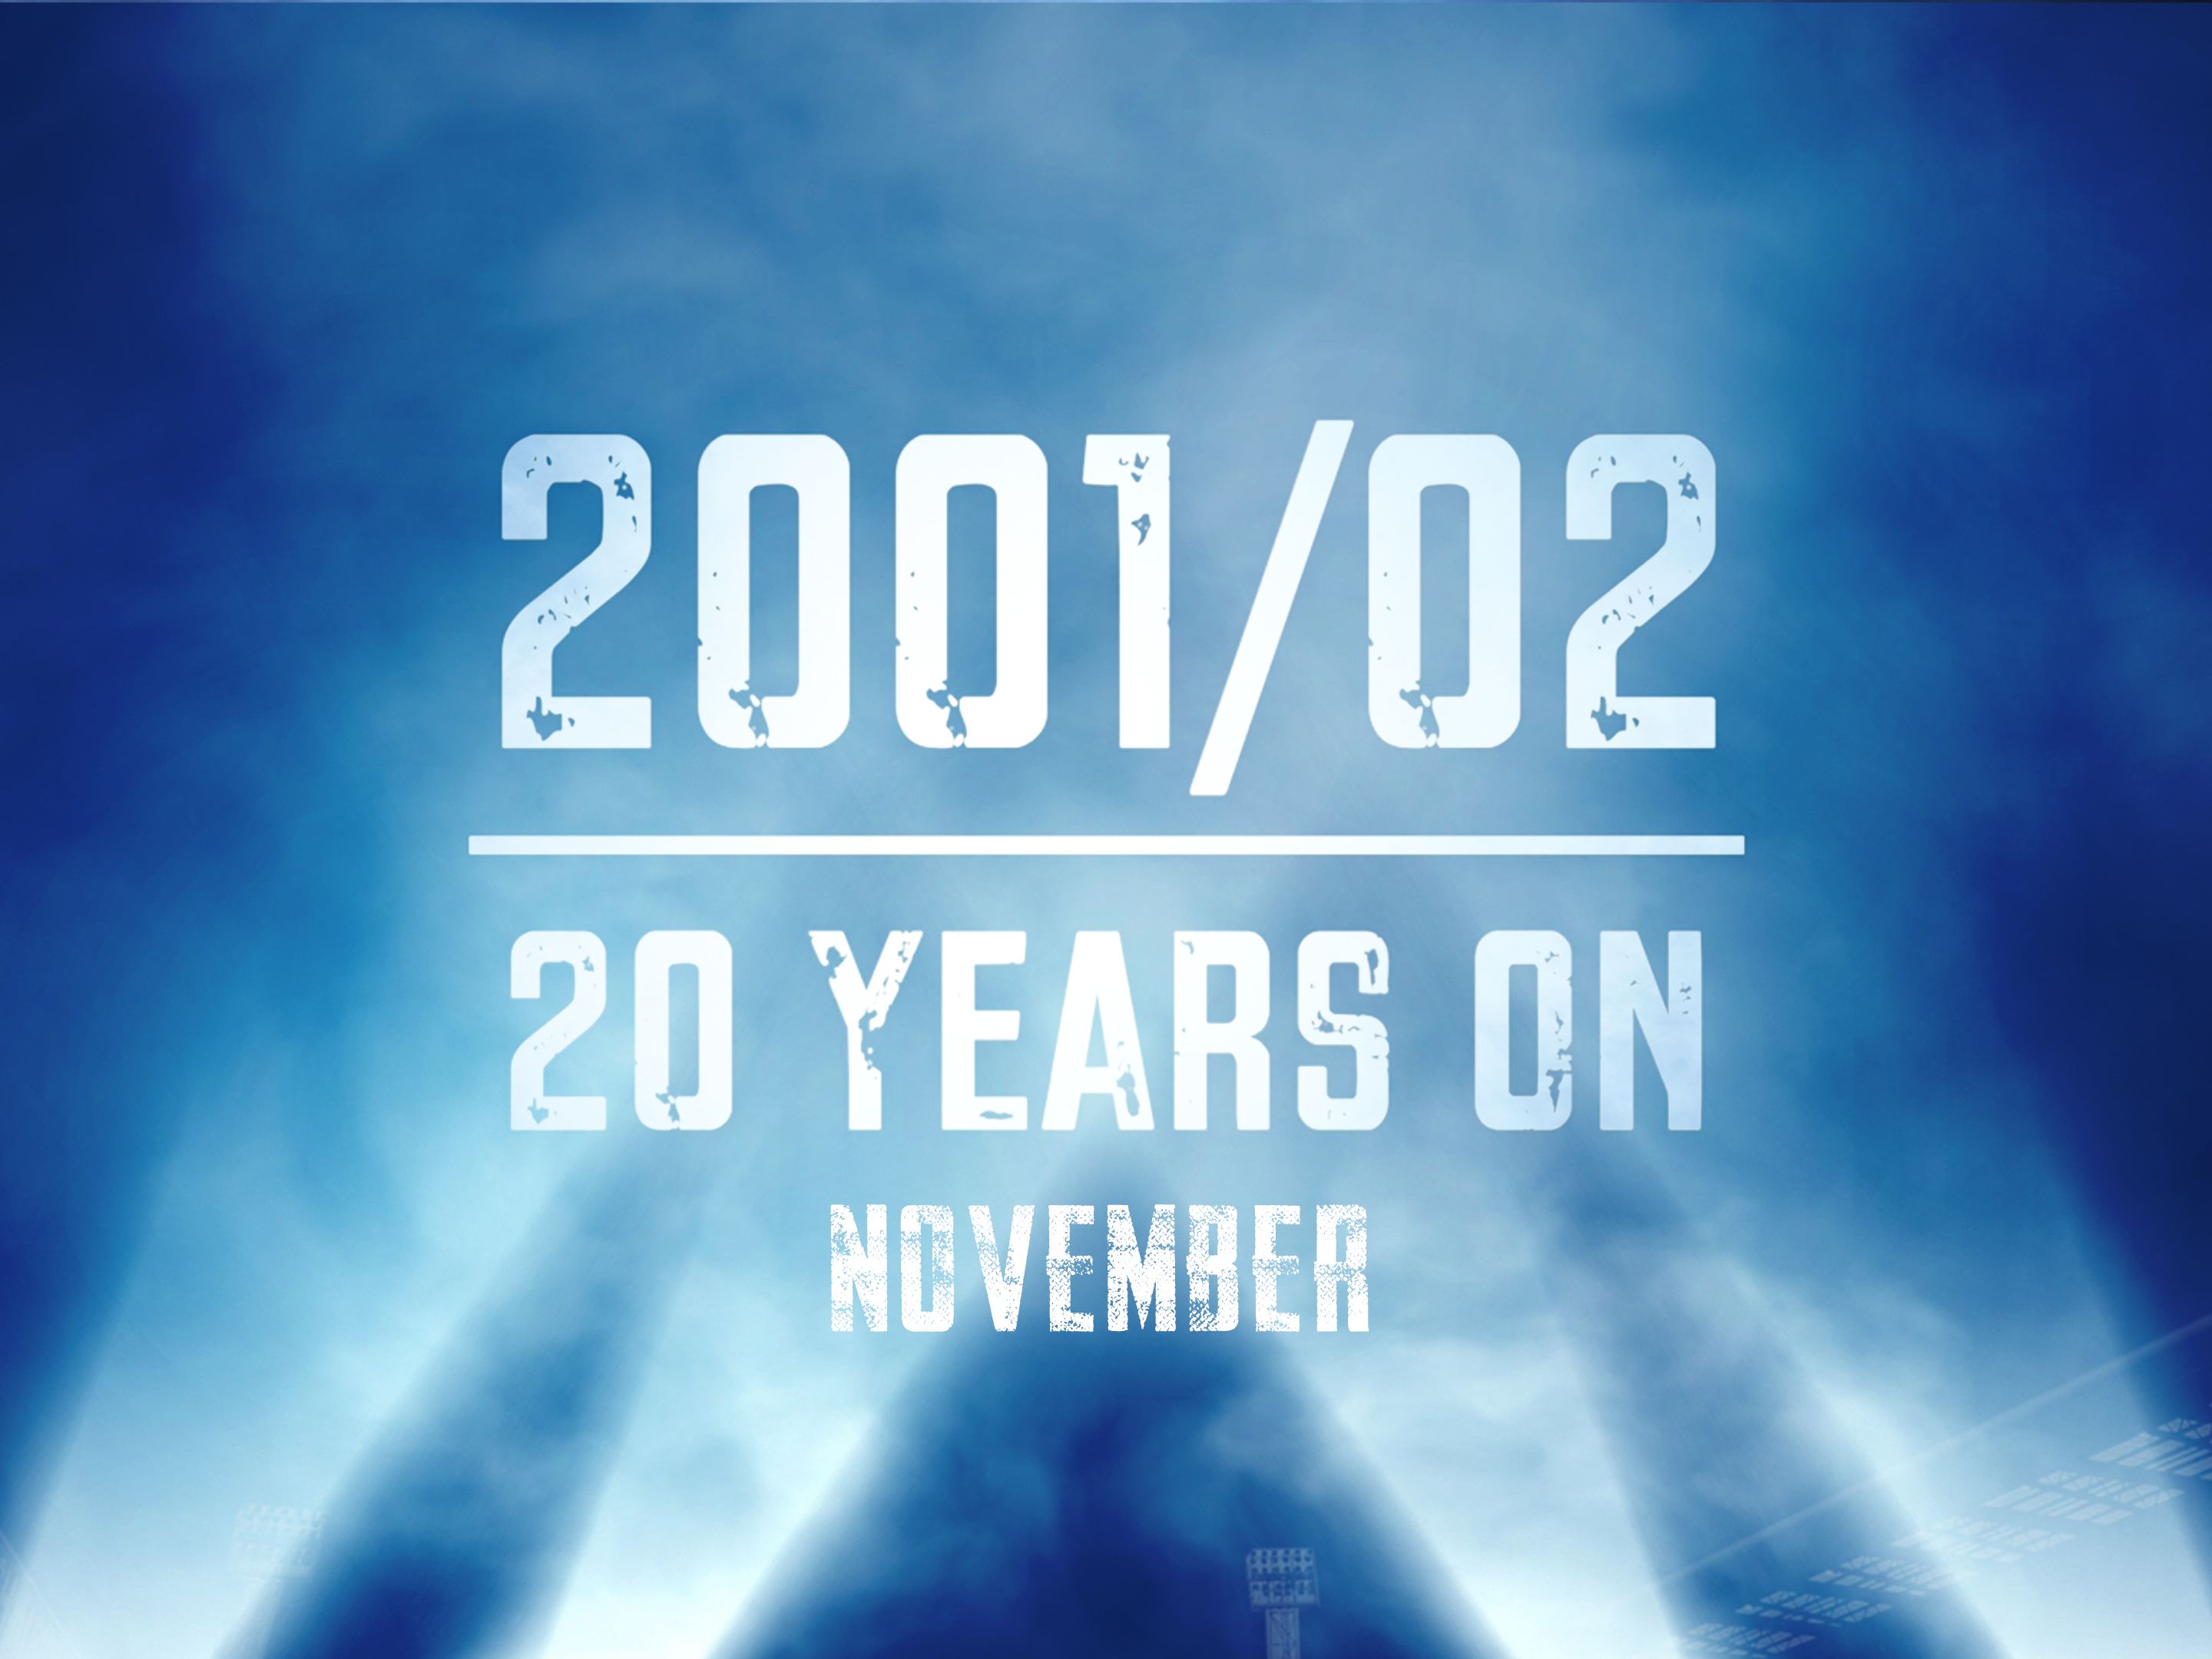 2001/02: 20 years on | November review